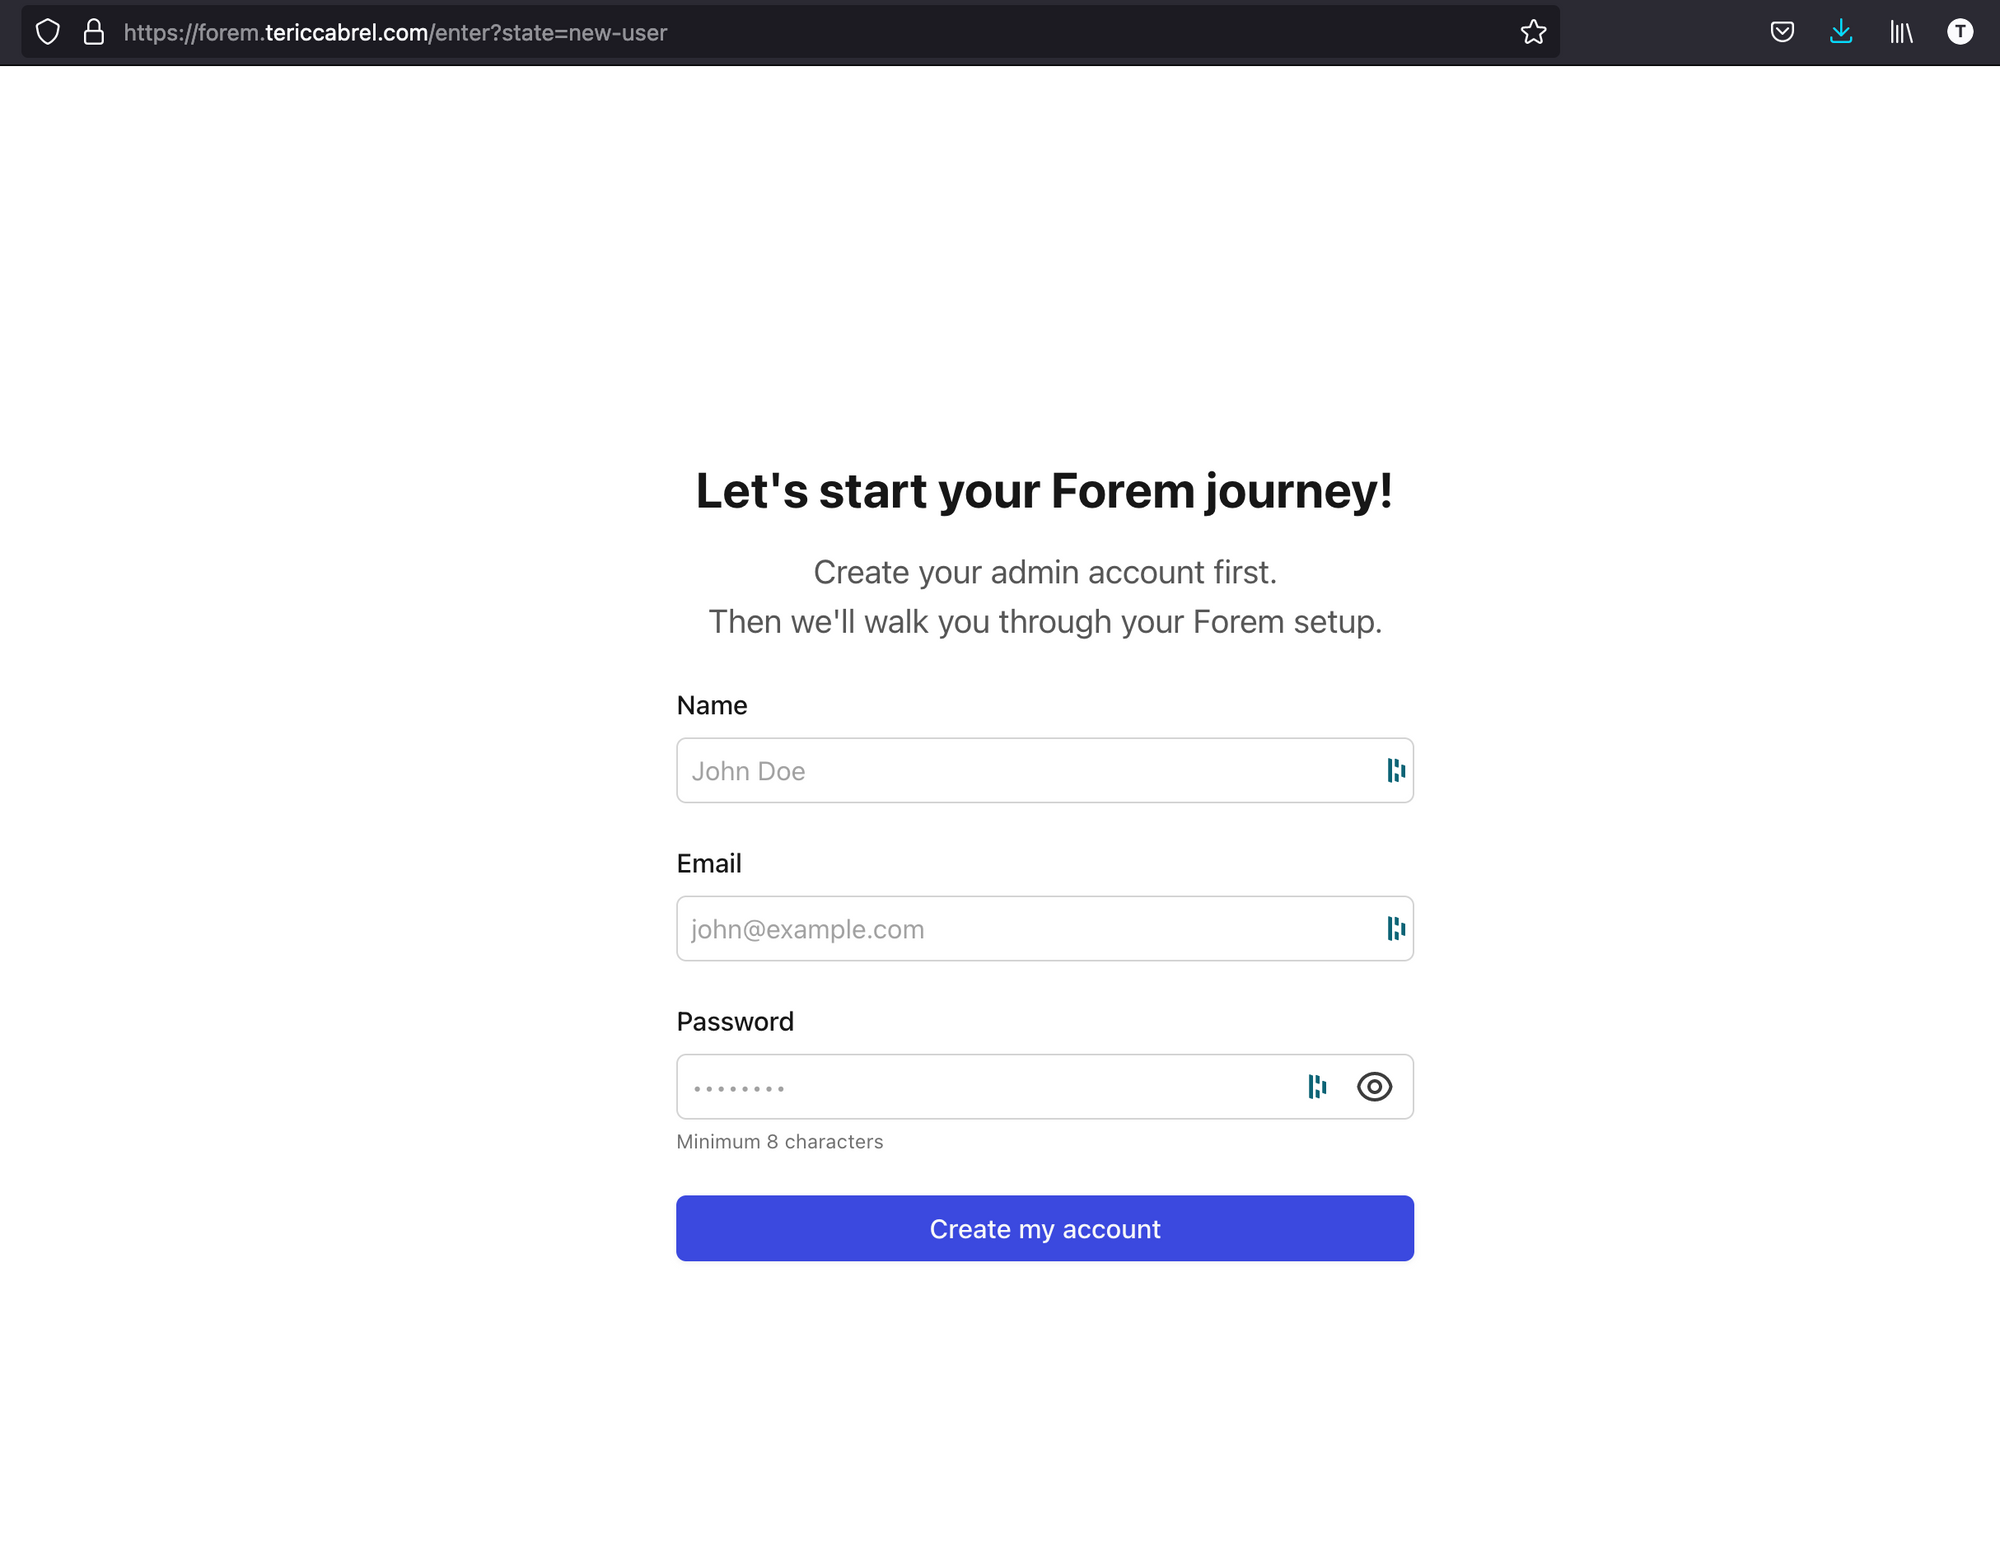 Create the first forem admin user.